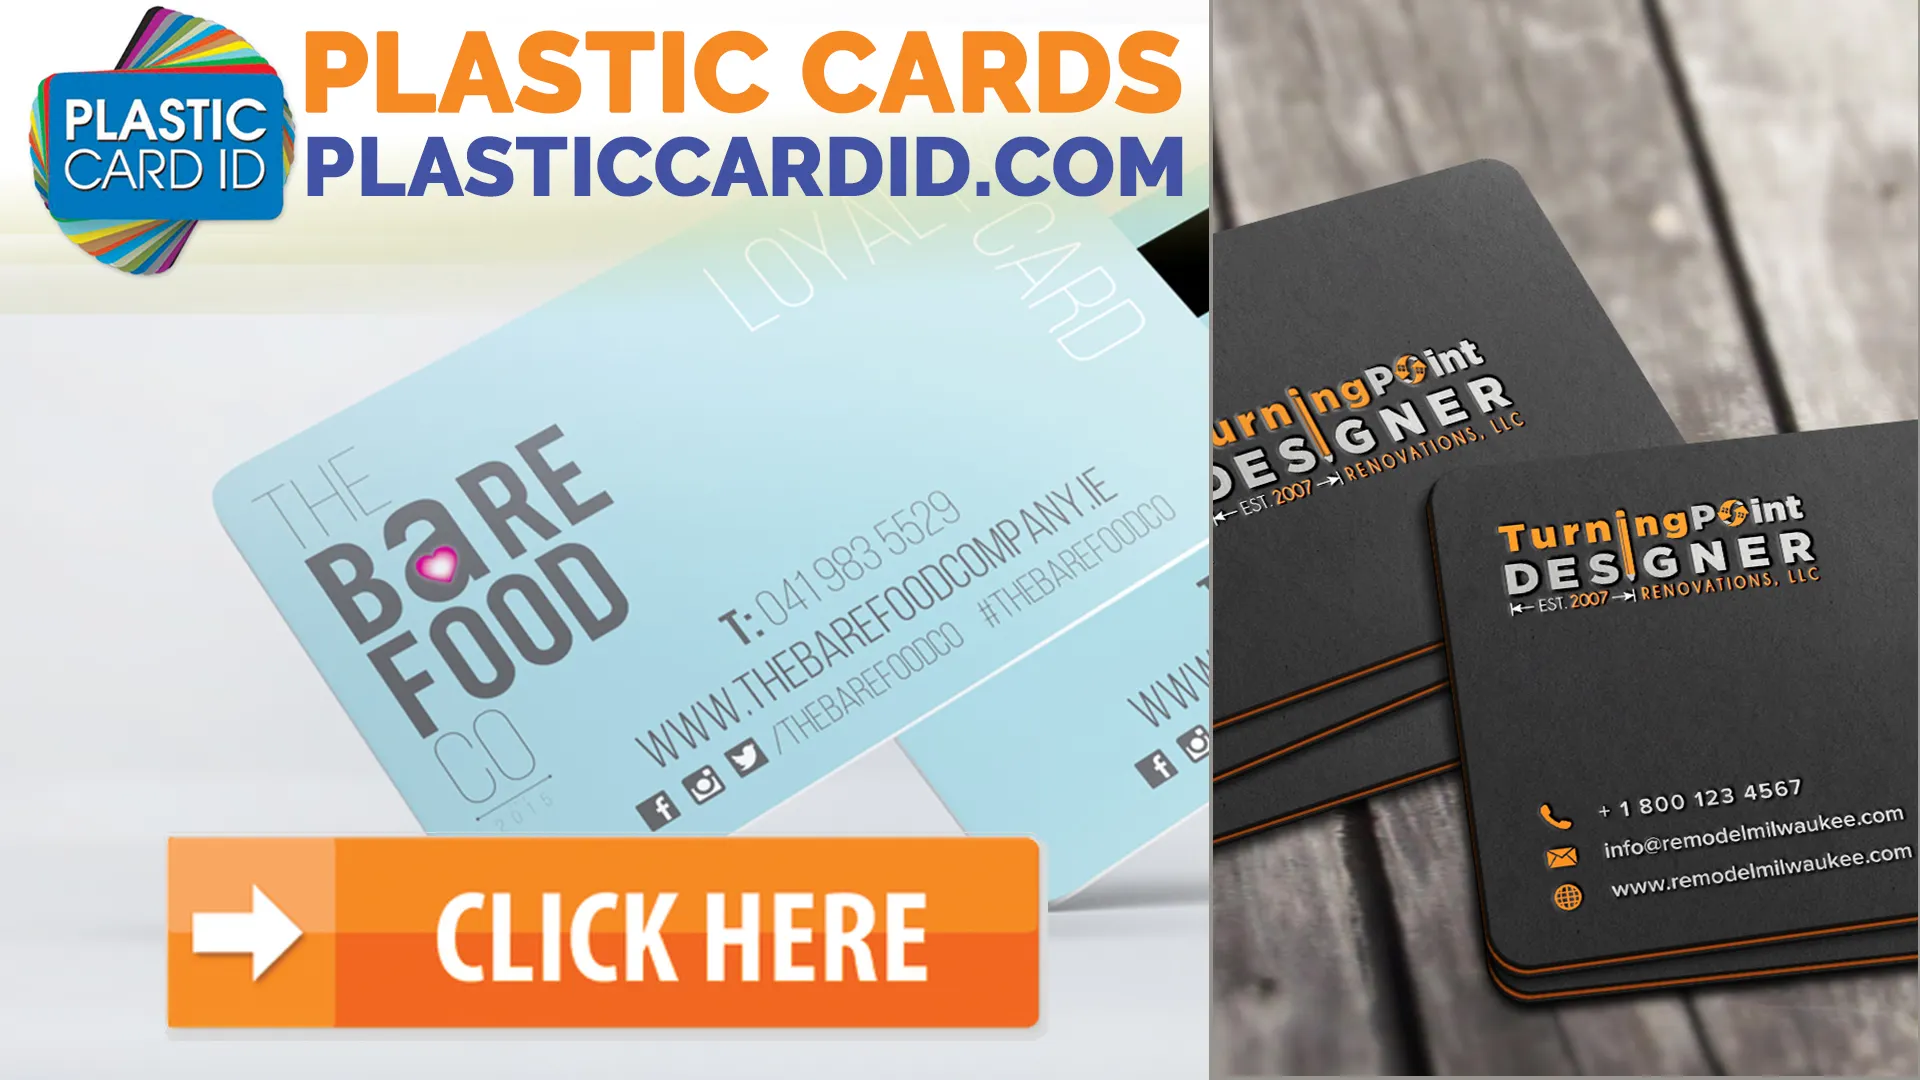 Welcome to Plastic Card ID




: Smart, Cost-Effective Design Choices for Bulk Plastic Card Orders